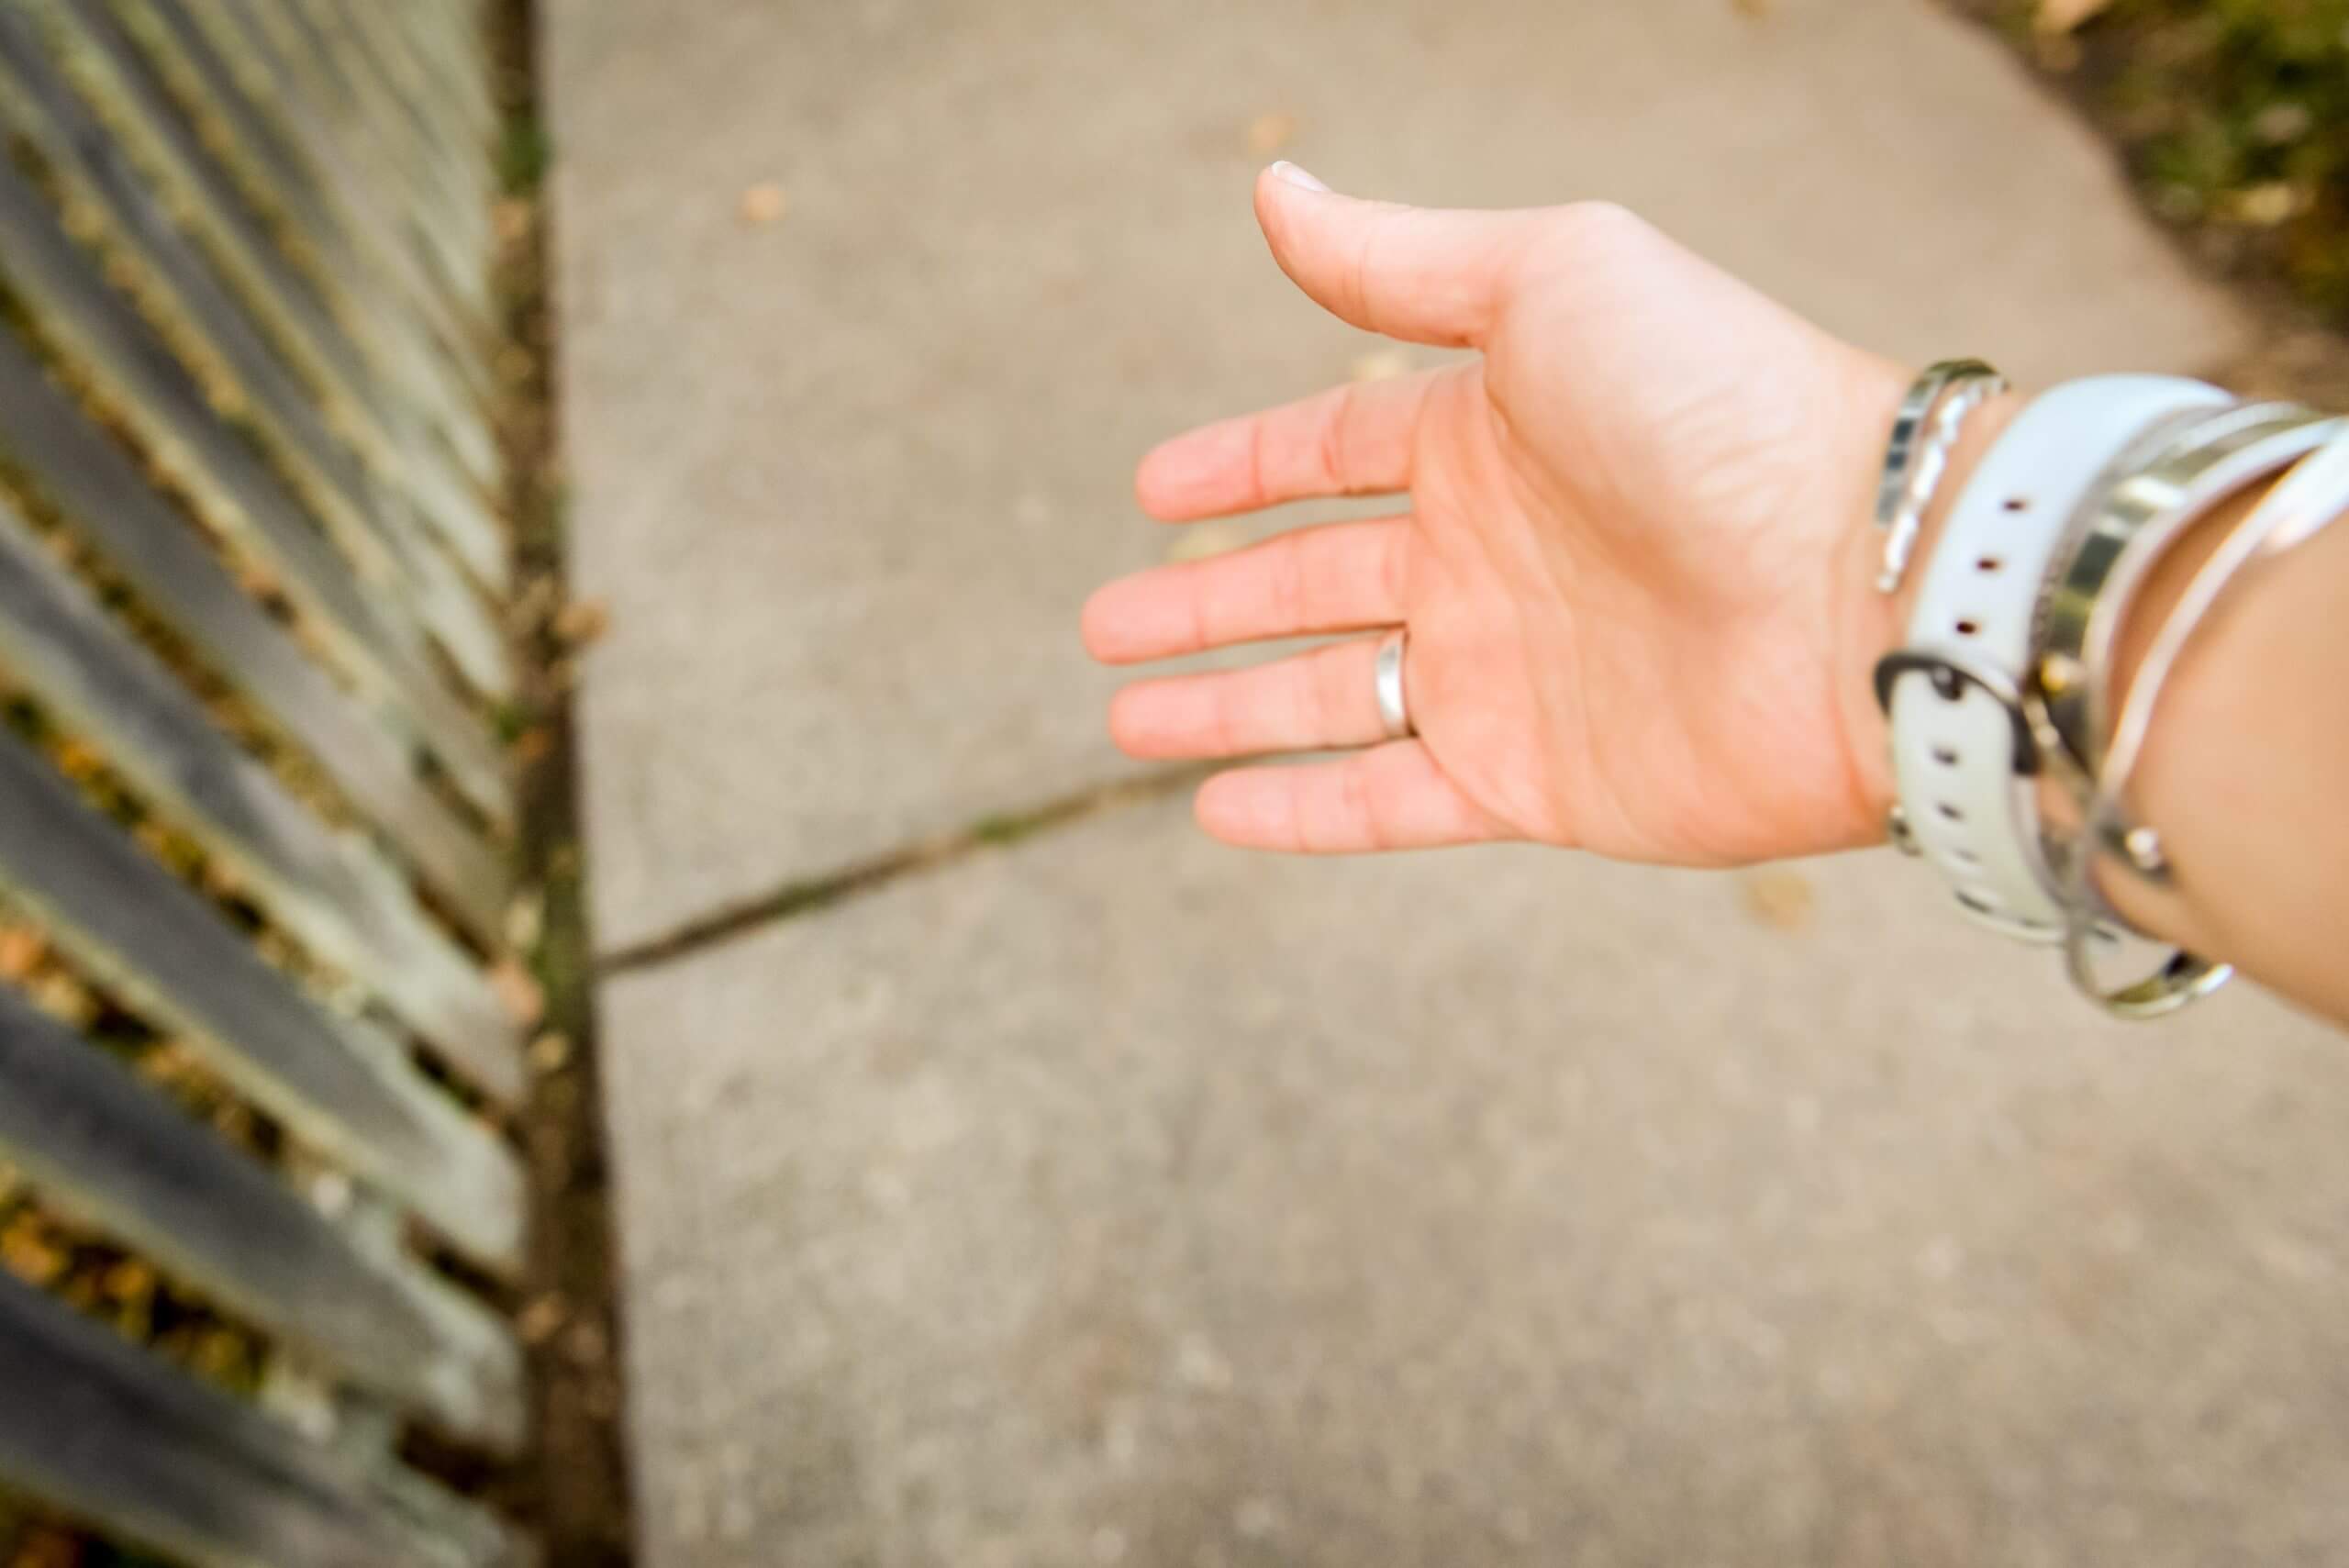 A focused view of an outstretched arm and hand over an unfocused view of a sidewalk below.